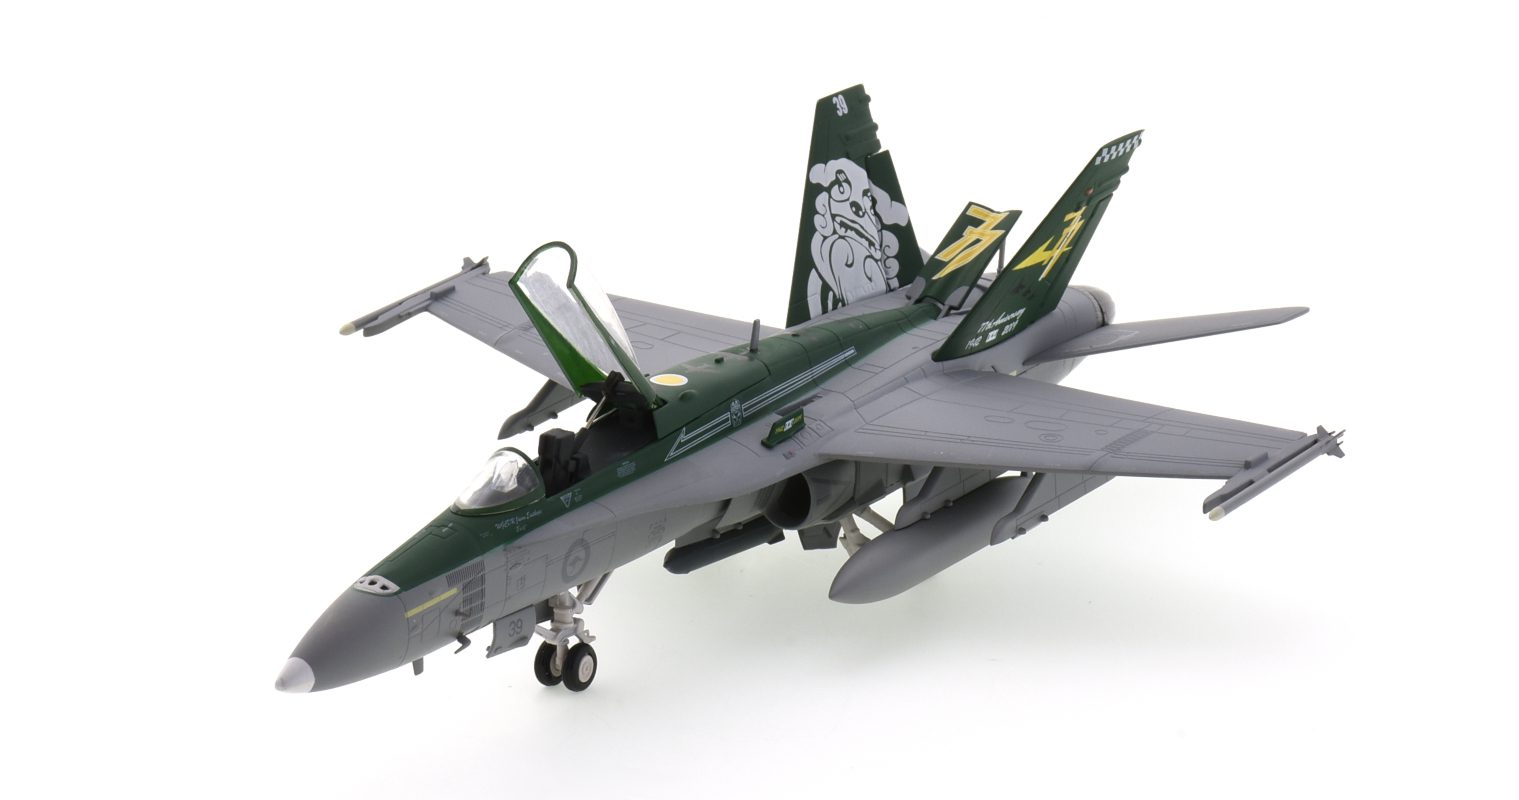 Front port side view of Herpa Wings HE580601 - 1/72 scale diecast model McDonnell Douglas F/A-18A Hornet, s/n A21-39, No.77 Sqn, RAAF, squadrons 77th Anniversary, 2019.